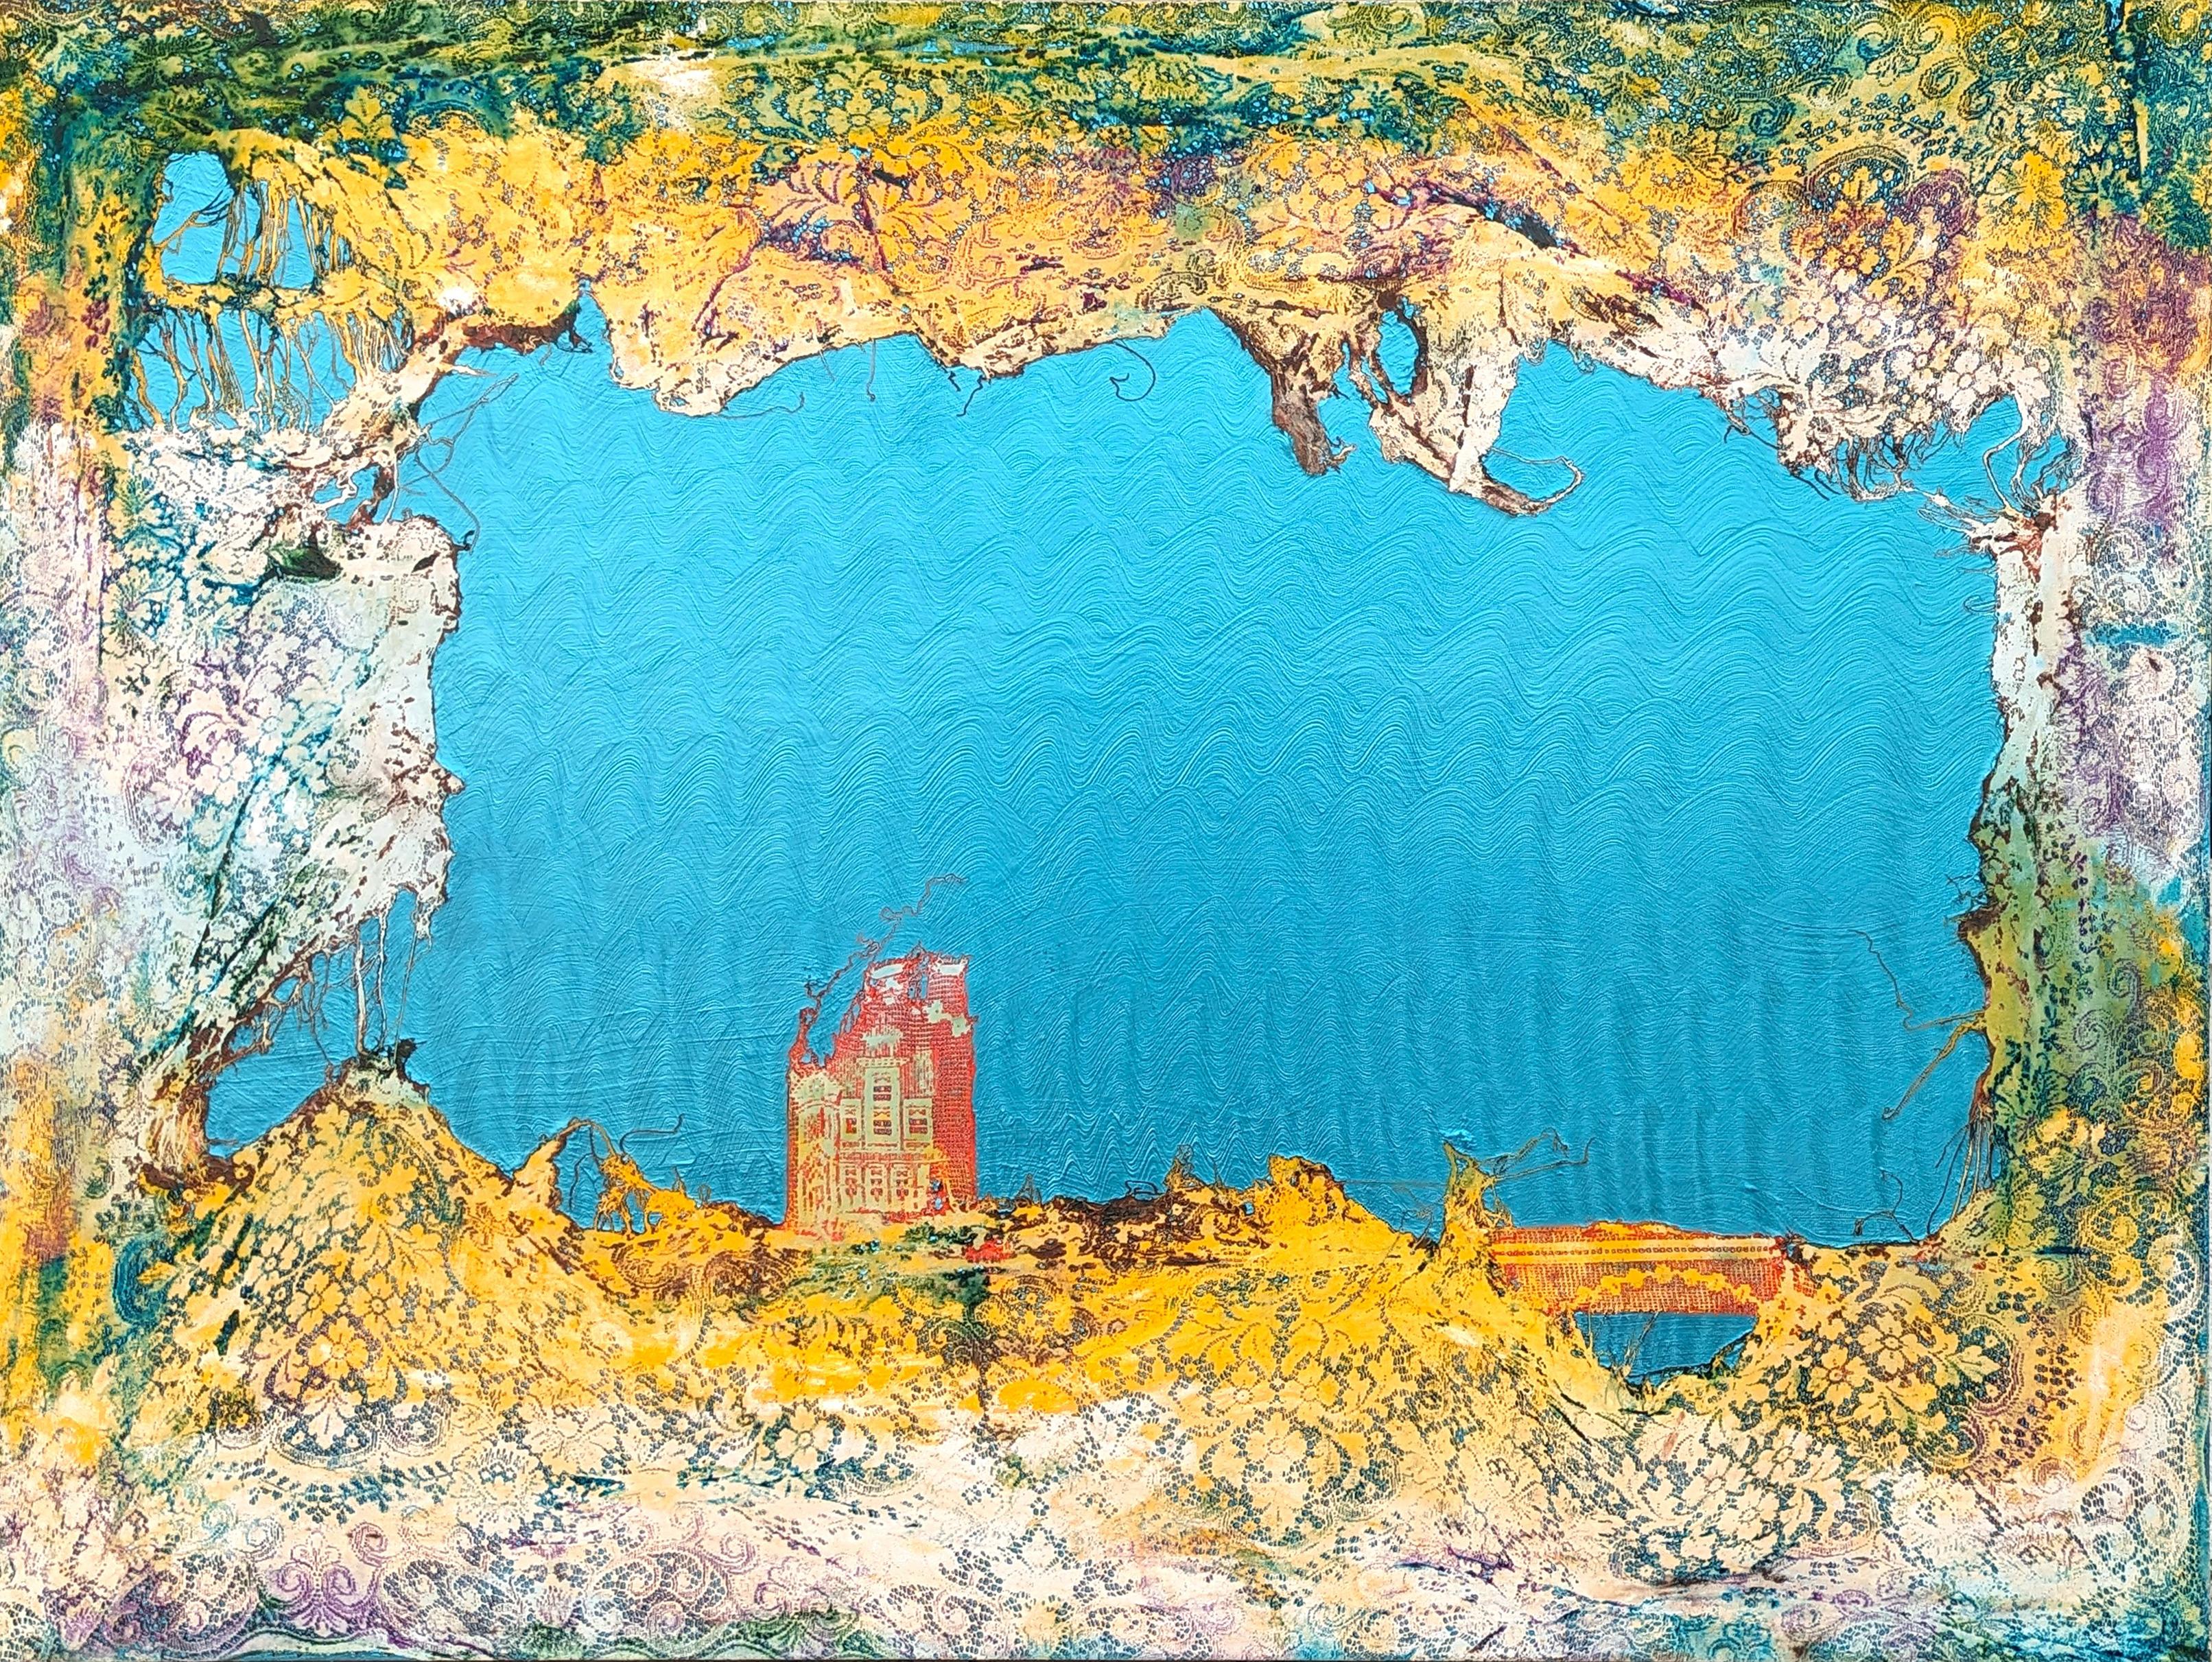 Mark Flood Landscape Painting - "Udolpho" Contemporary Abstract Teal, Yellow, and Green Lace Painting